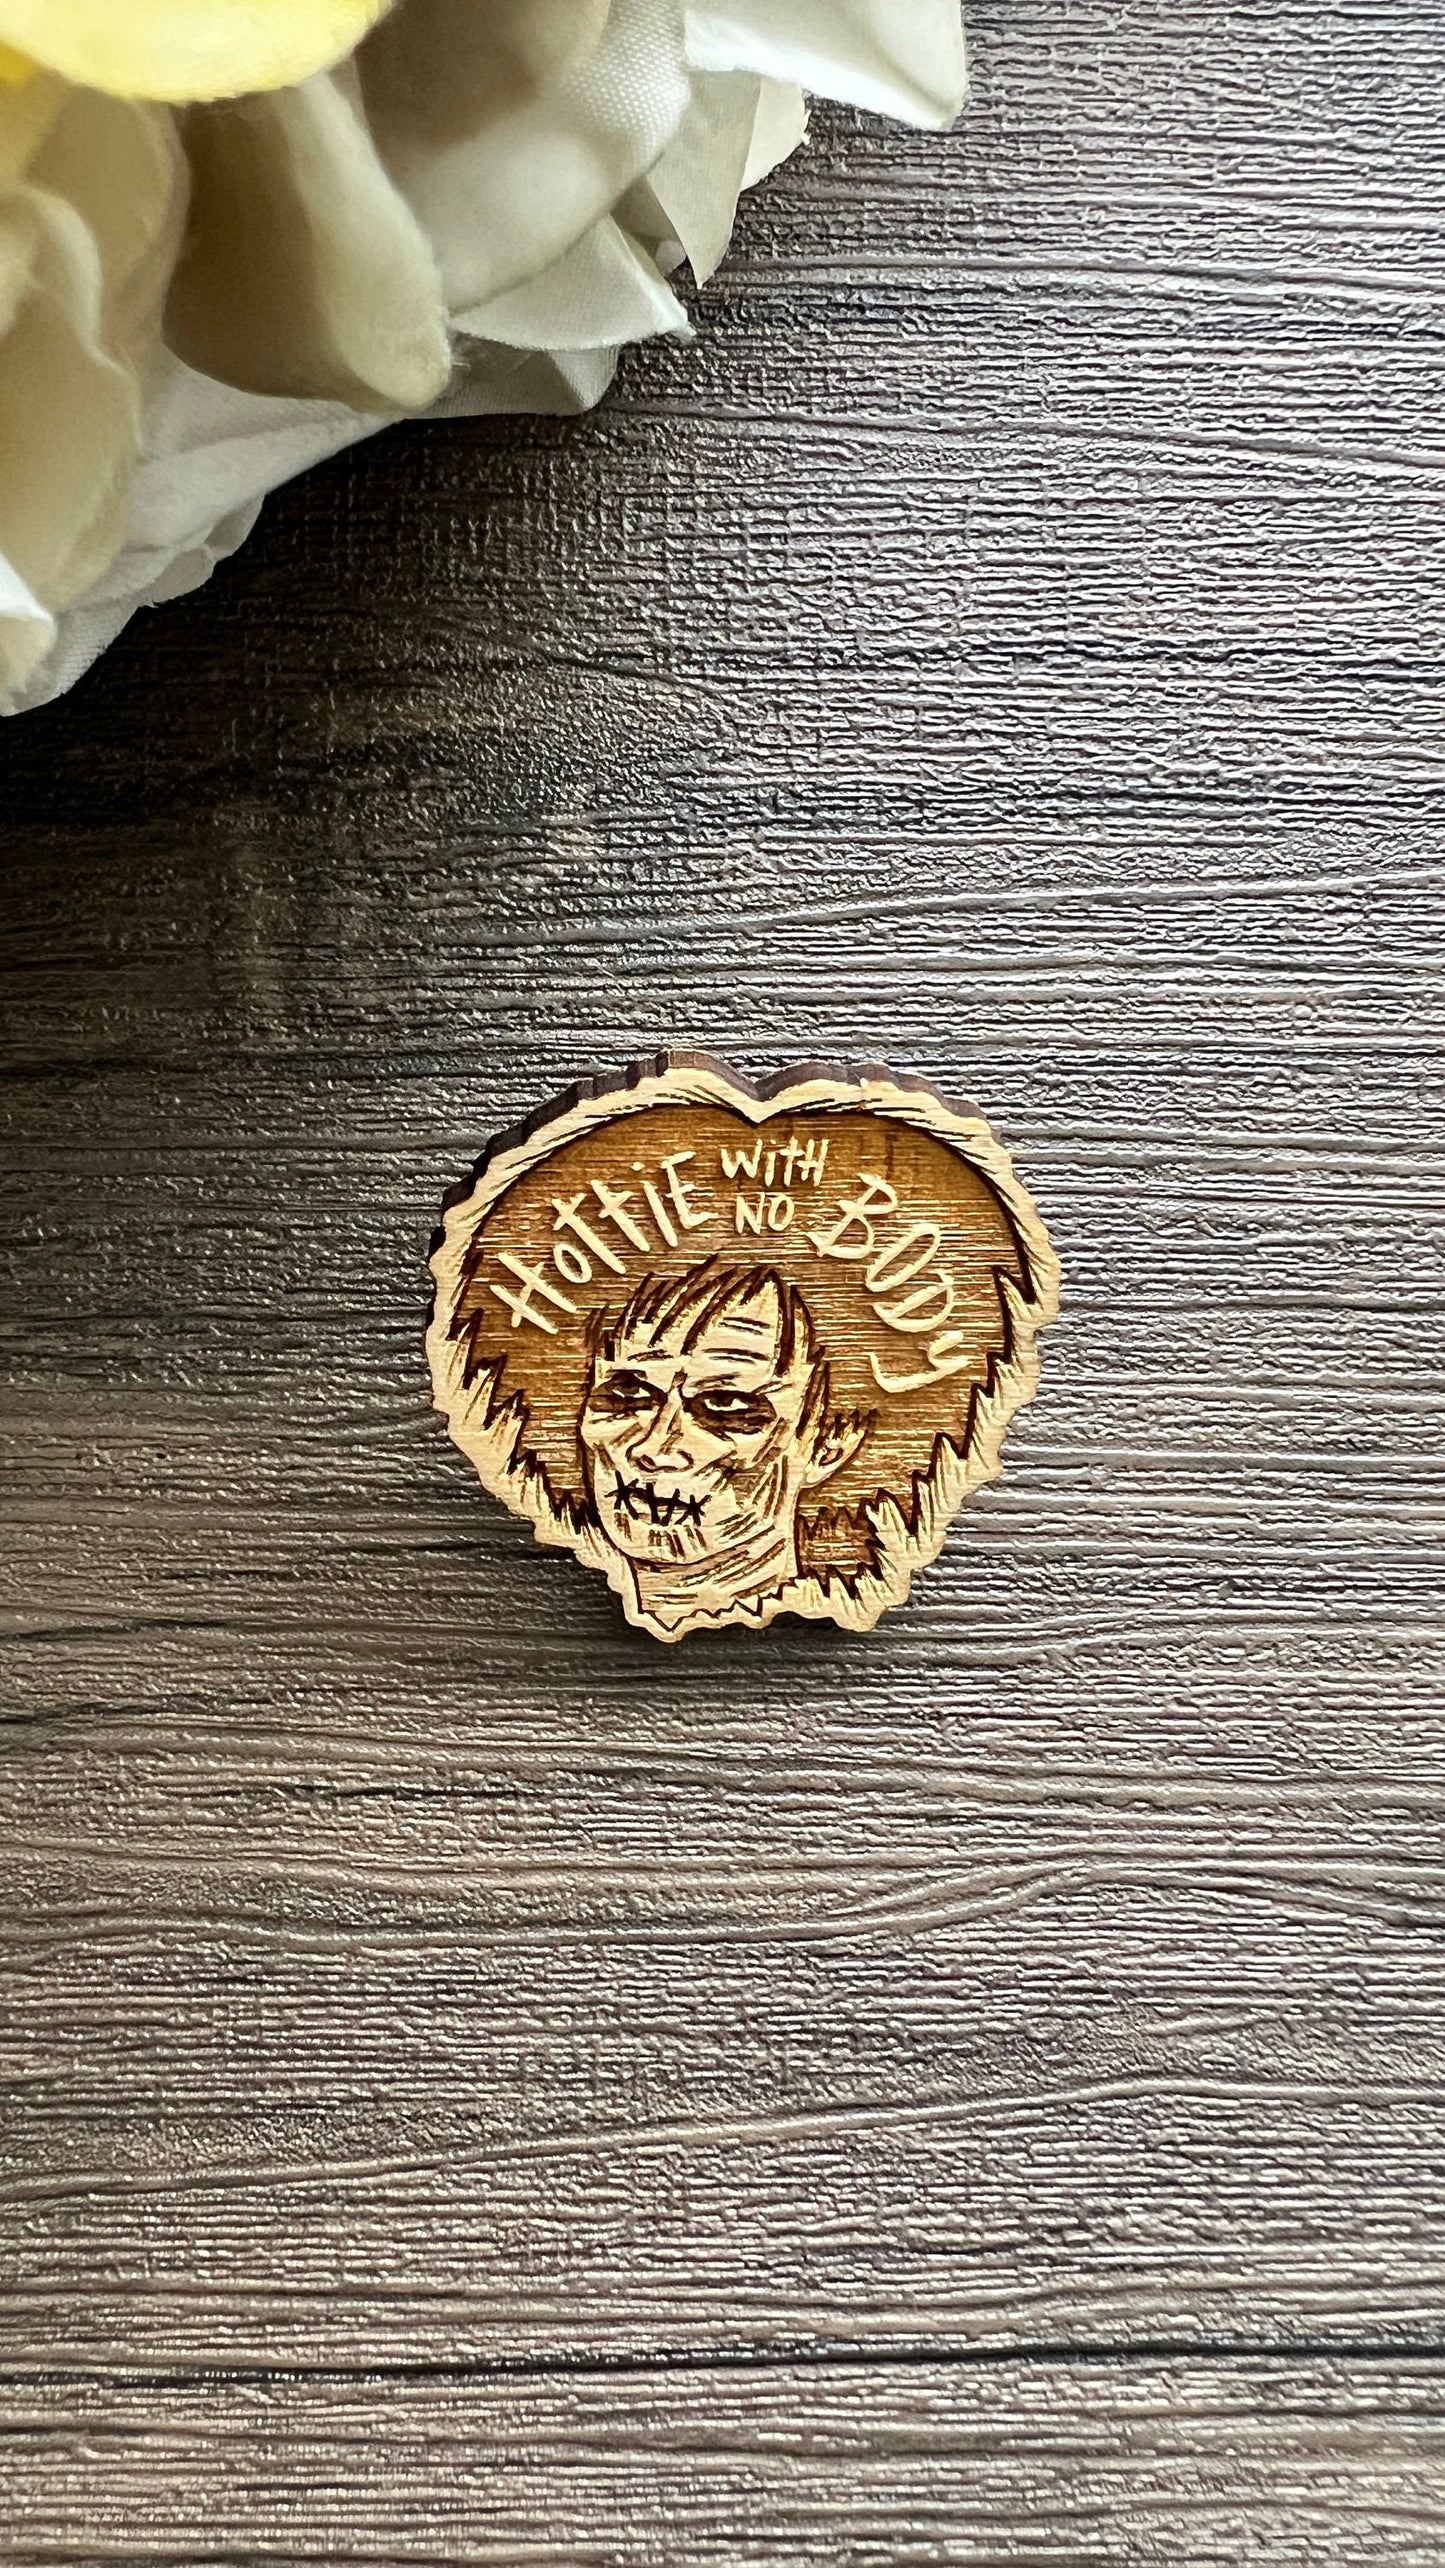 Hocus Pocus Billy Butcherson PIN - Lapel Pin - Hocus Pocus Pin, Halloween Pin, Sanderson Sisters Pin, Binx Pin, I Put a Spell on You Pin